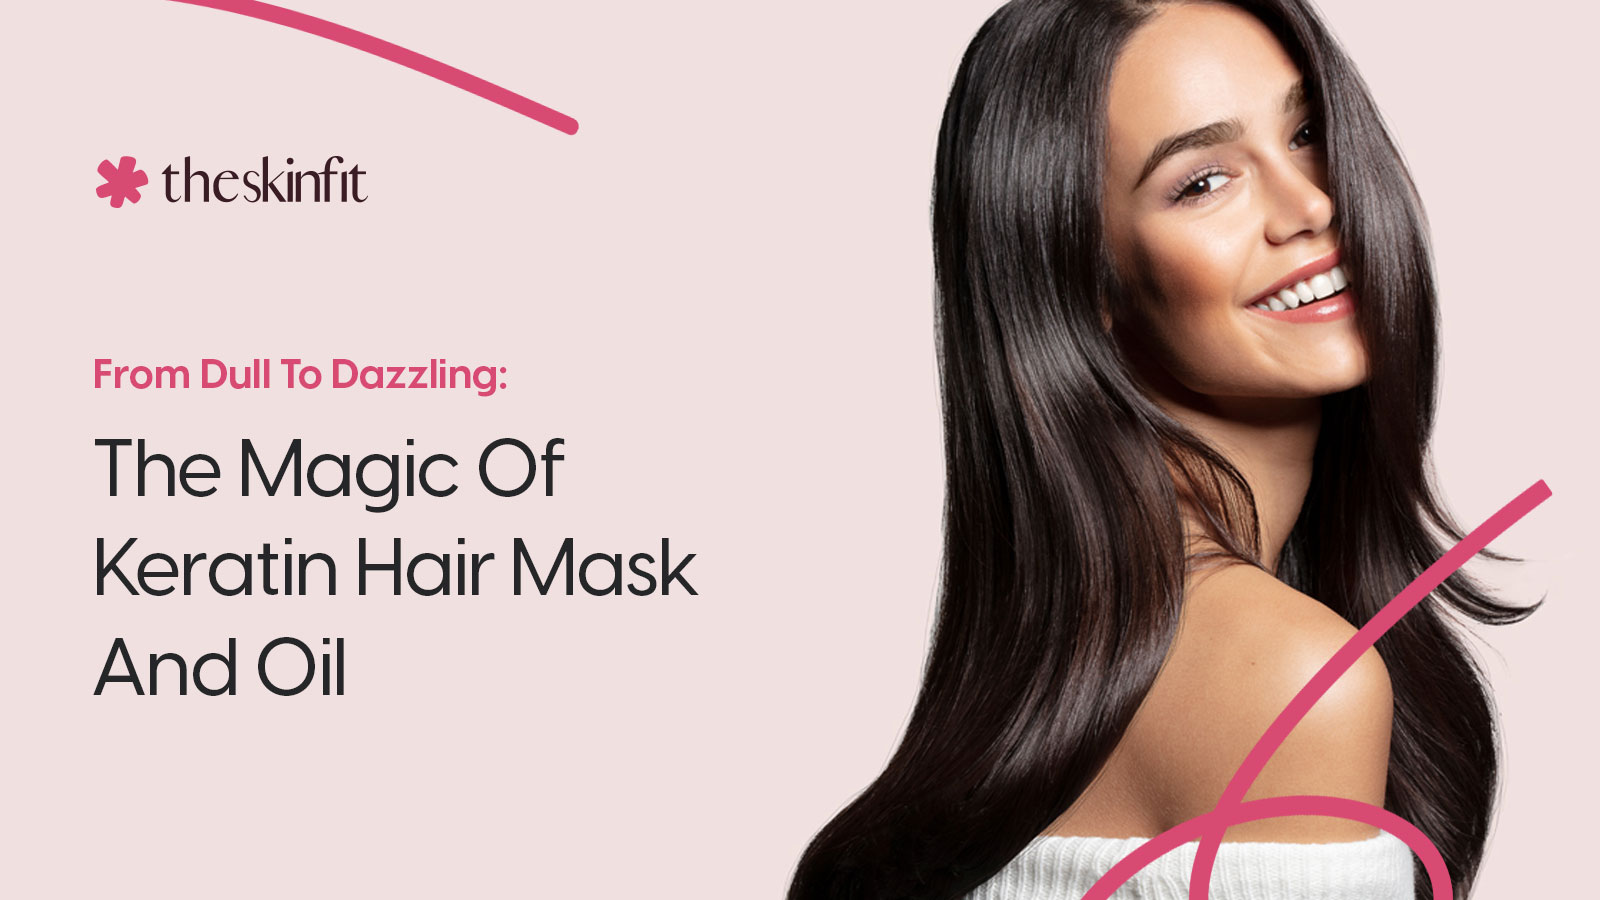 From Dull To Dazzling: The Magic Of Keratin Hair Mask And Oil